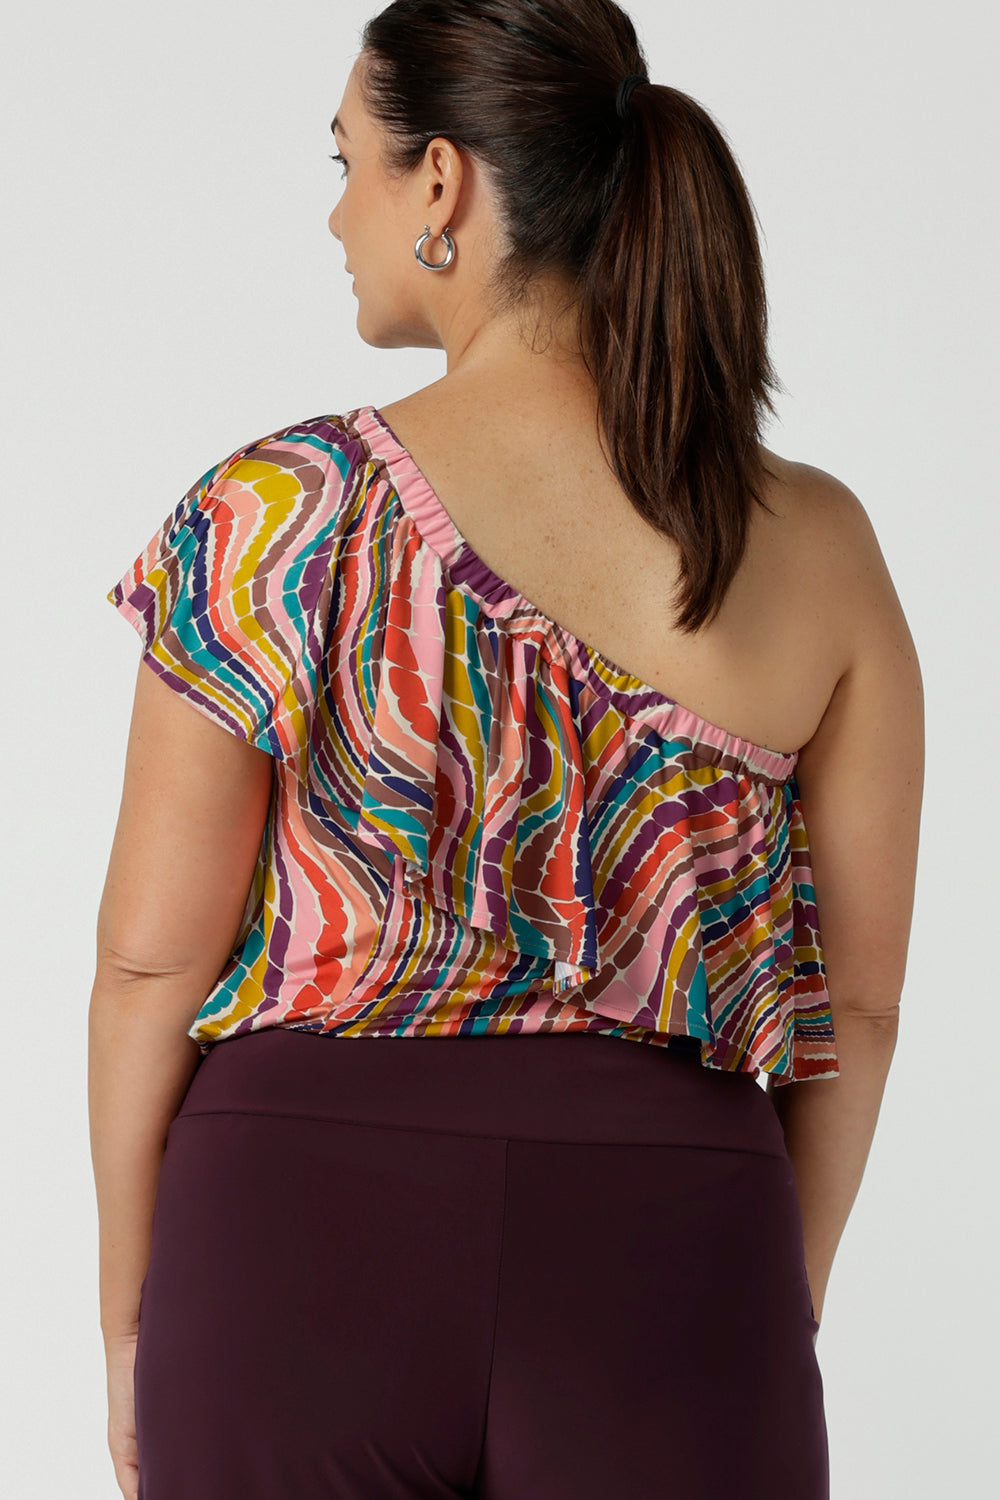 Back view of a size 12 one shoulder top woman wears an off shoulder top in vibrant rainbow swirl Briar top in soft slinky jersey. Made in Australia for women size 8 - 24.